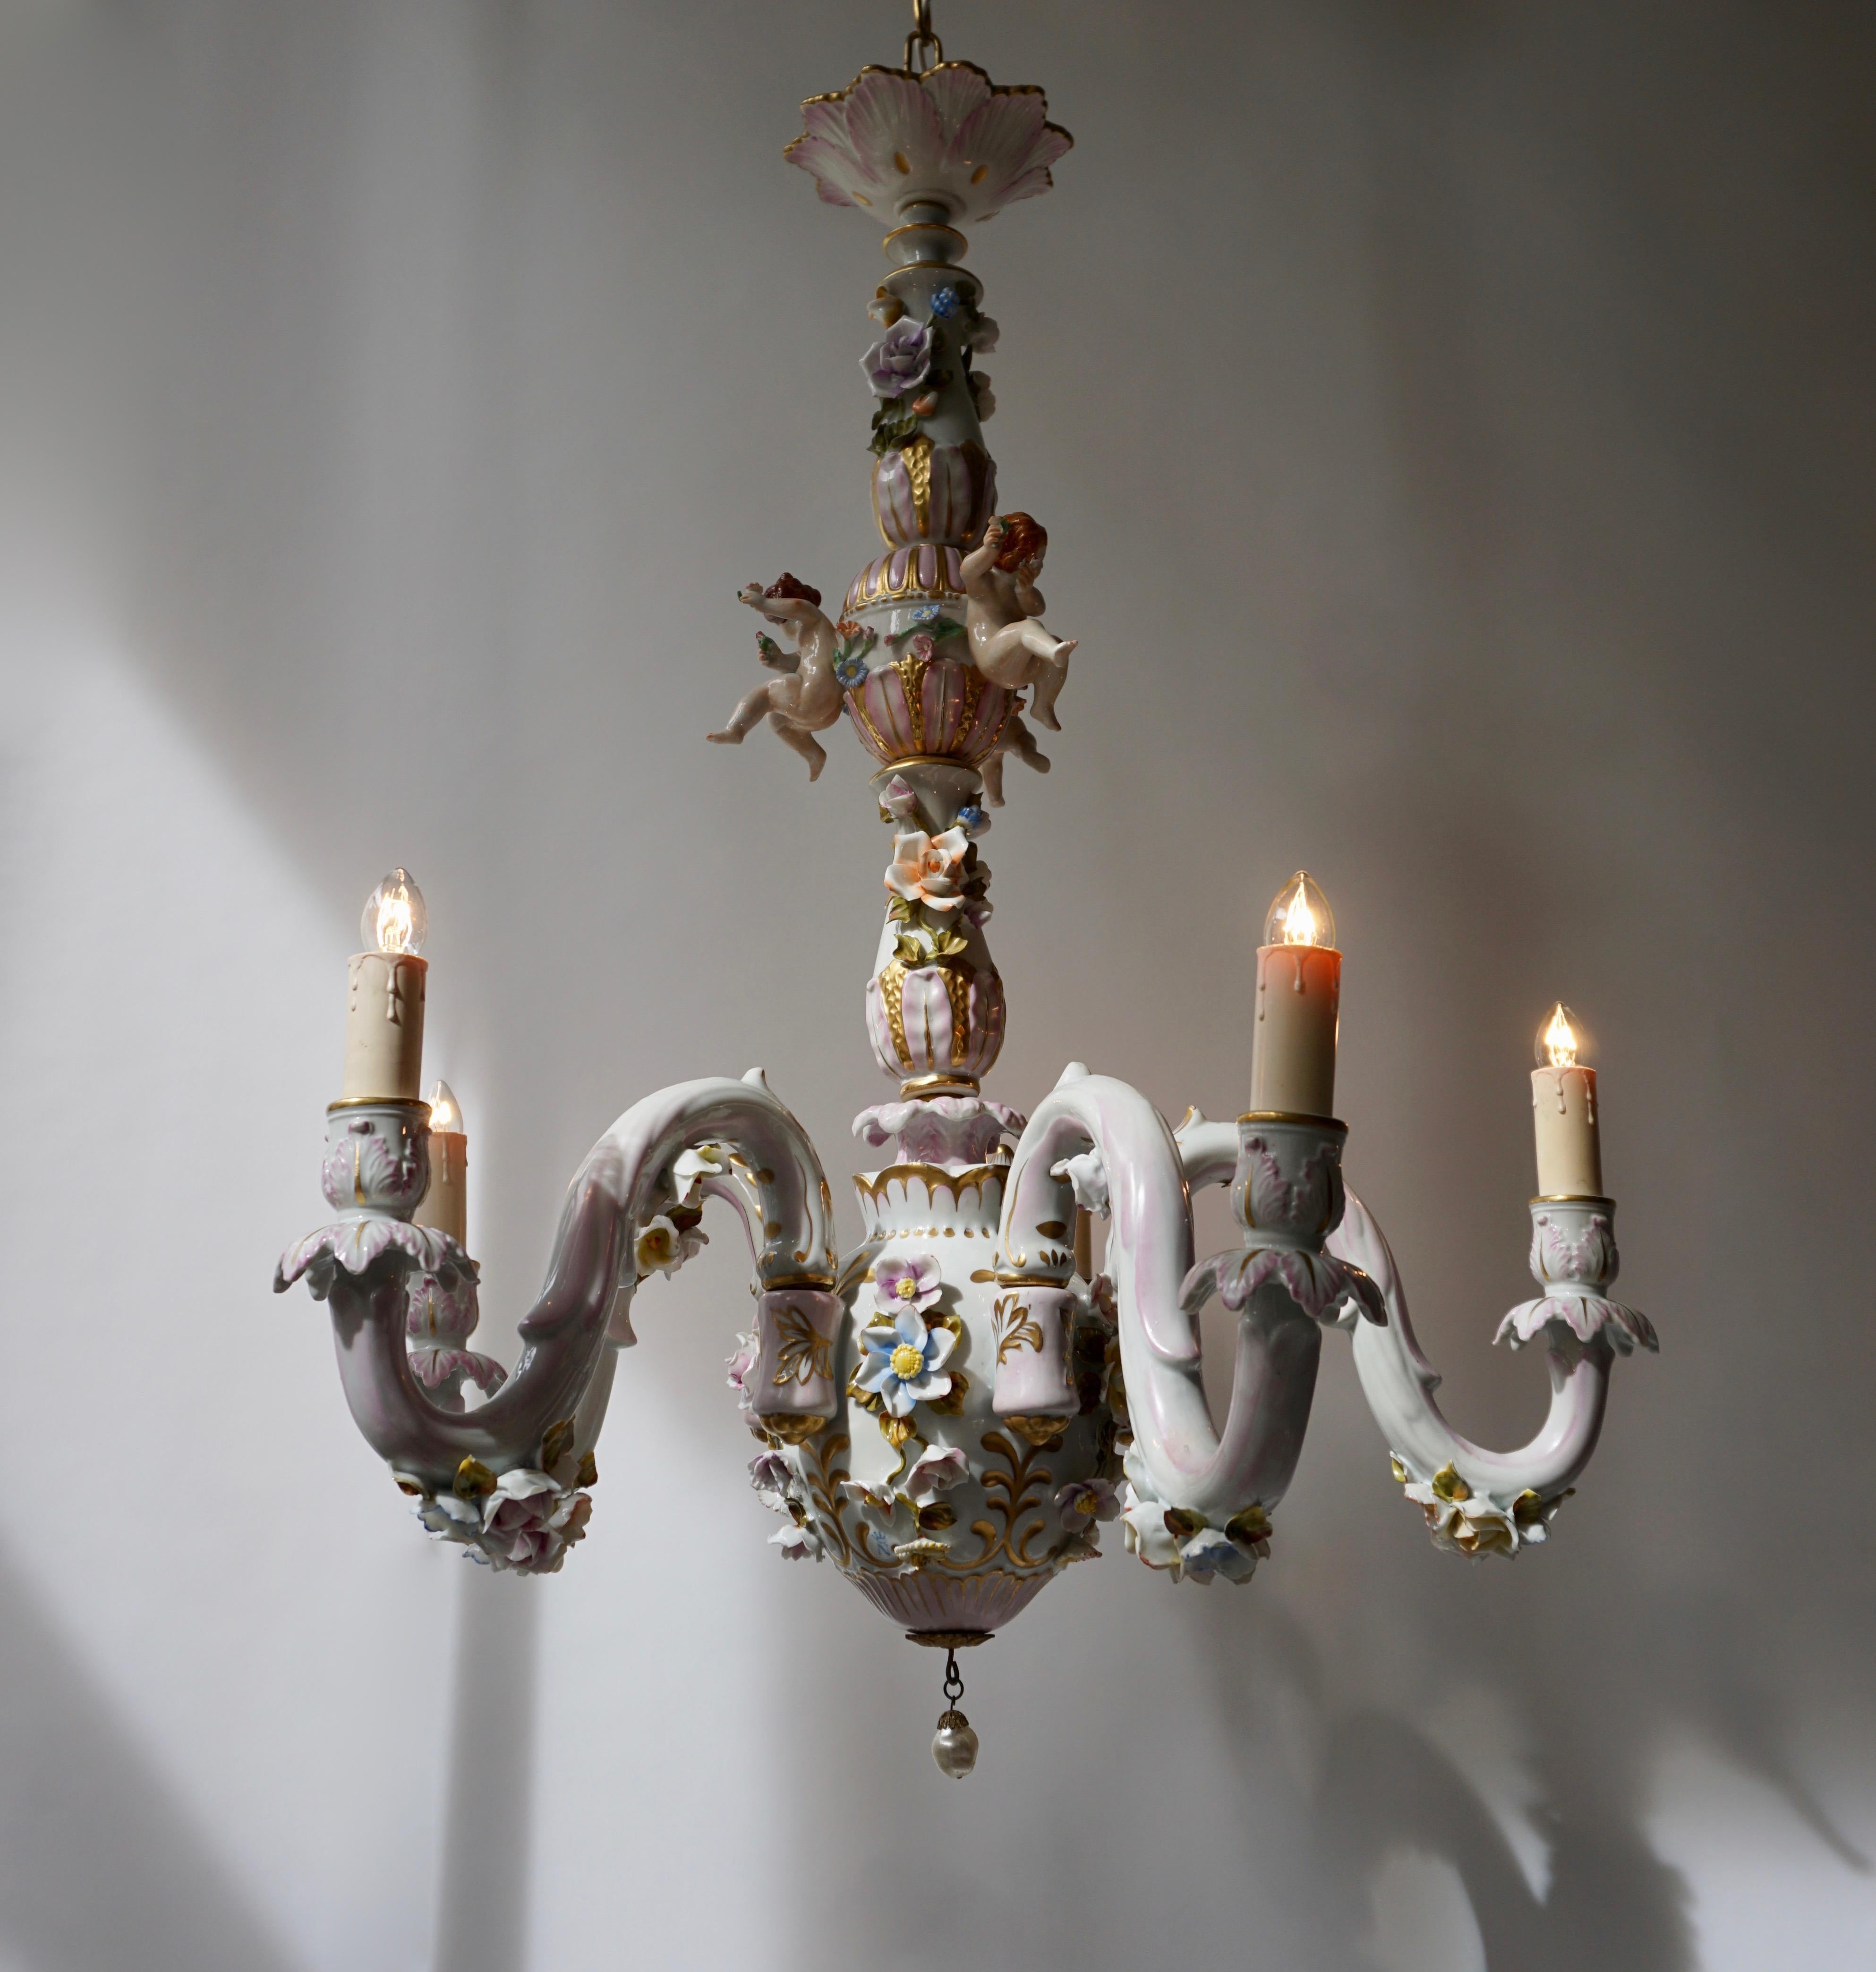 20th Century Capodimonte Porcelain Five Lights Chandelier with Putti and Floral Patterns For Sale